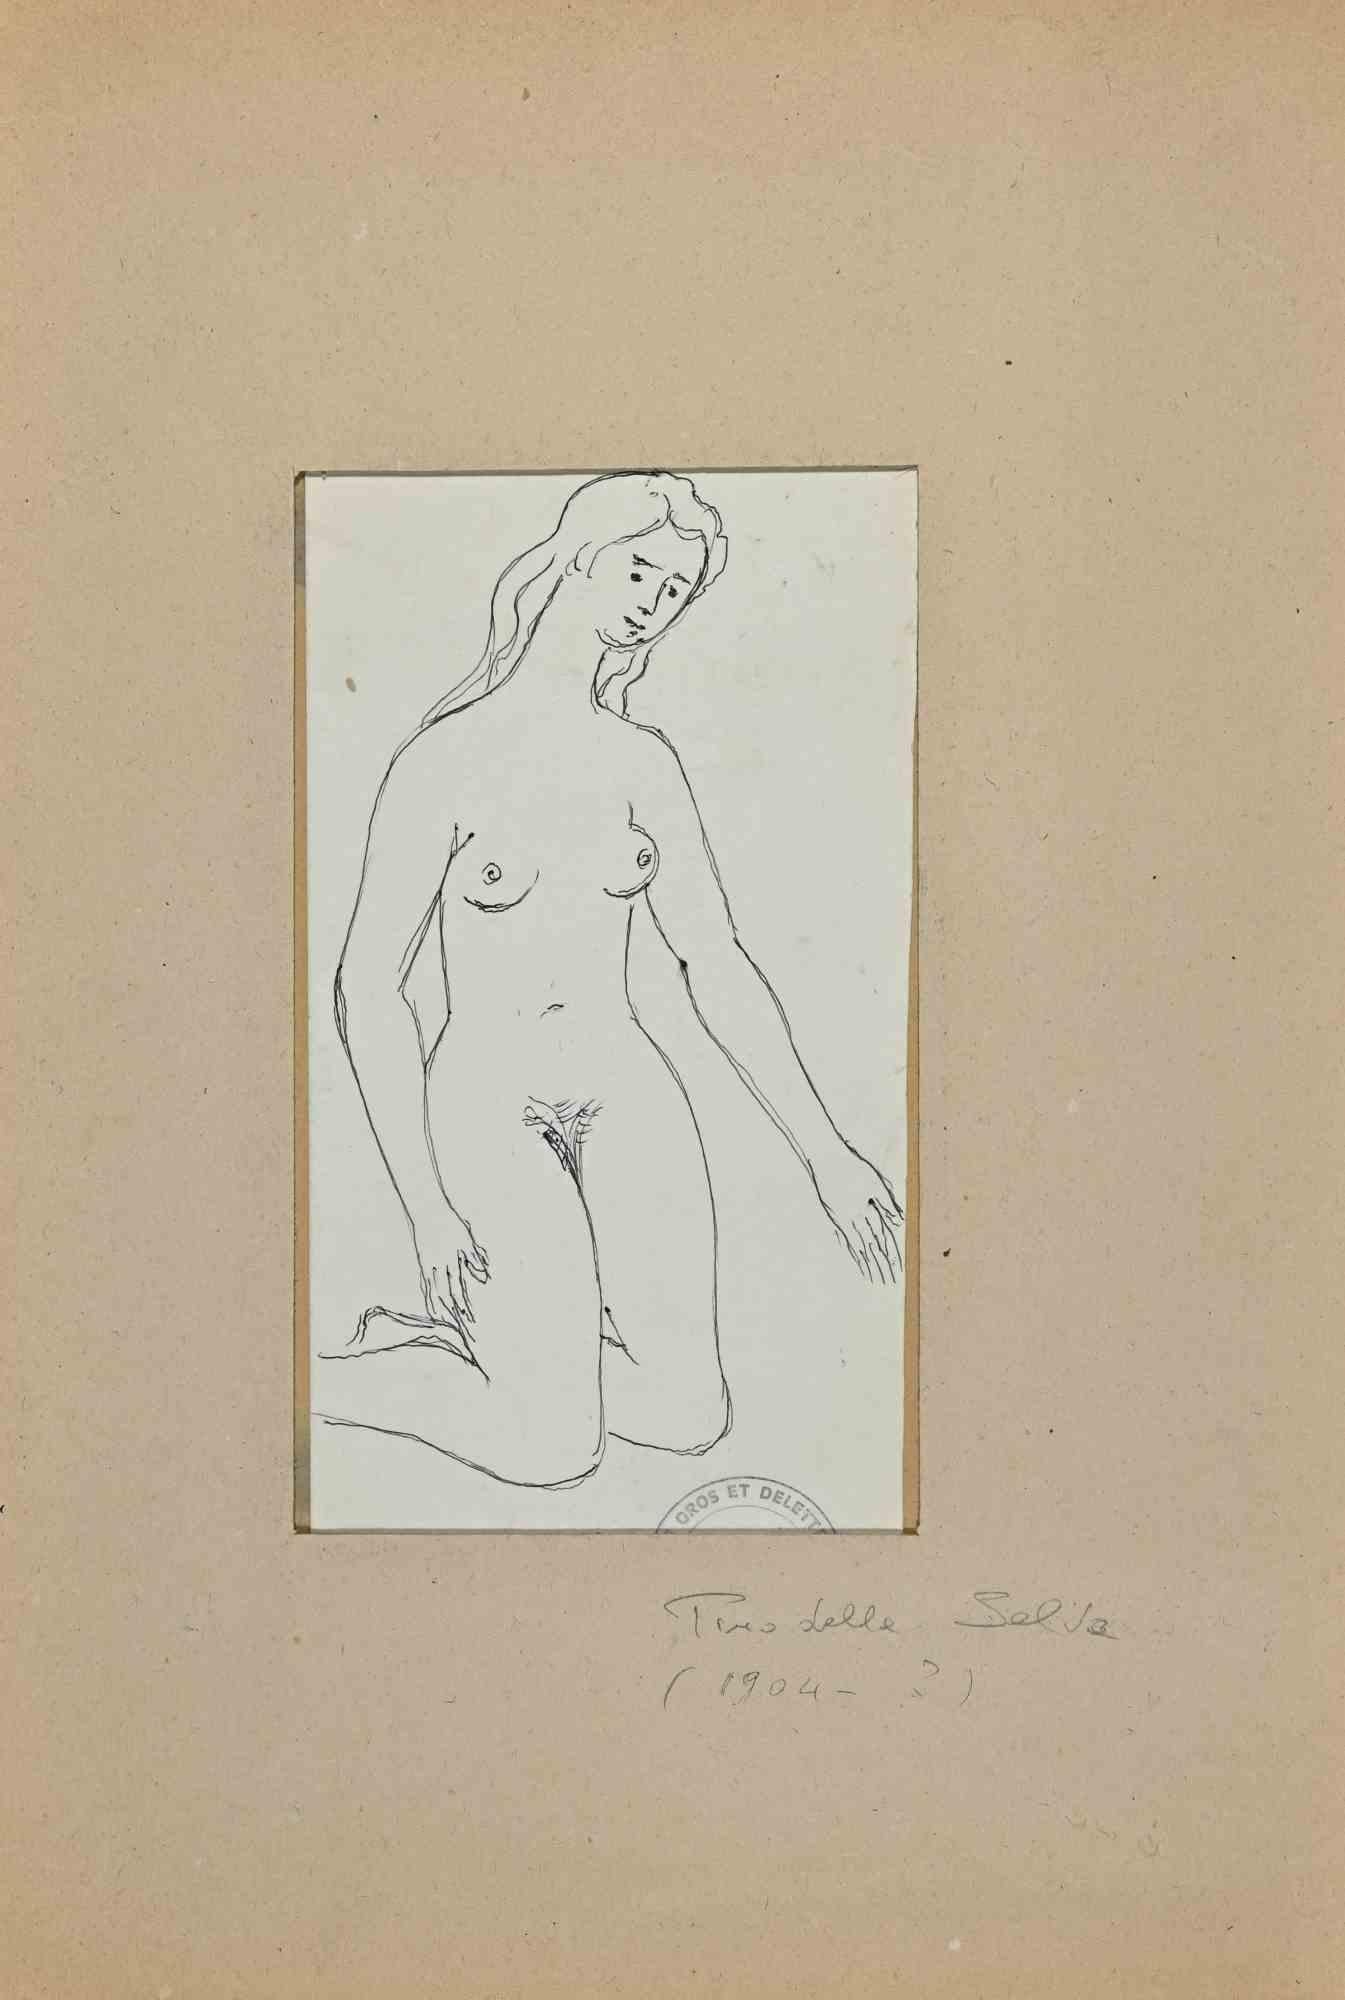 Nude of Woman is an Original China Ink Drawing realized by Pino della Selva (1904-1987).

Good condition included a brown cardboard passpartout.

Not signed.

Pino della Selva (pseudonym of Pino Giuffrida ) is a painter, sculptor , designer and